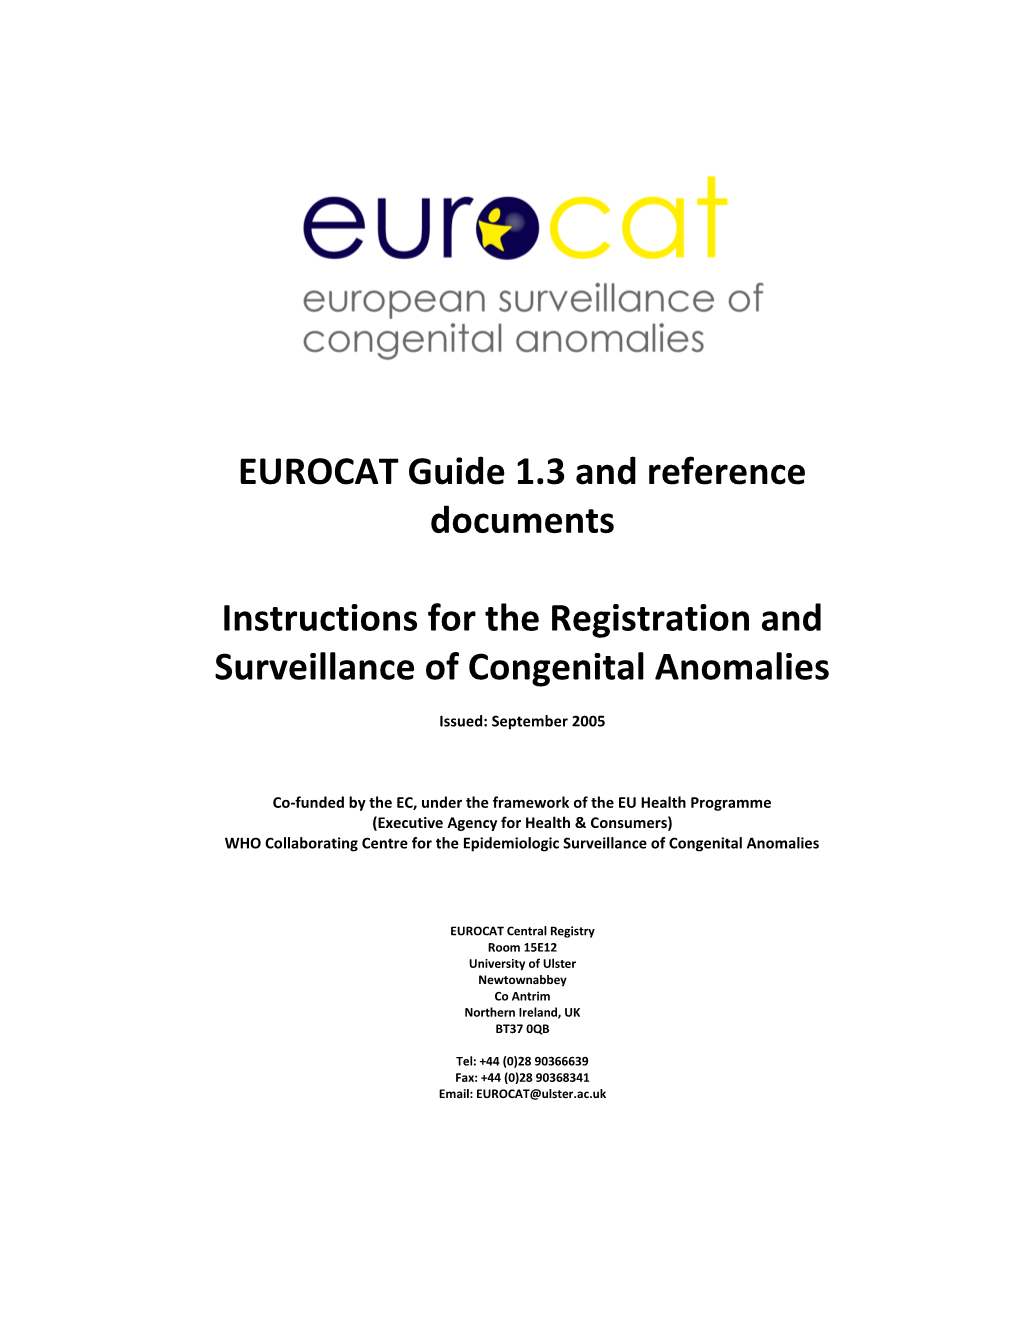 EUROCAT Guide 1.3 and Reference Documents Instructions for The